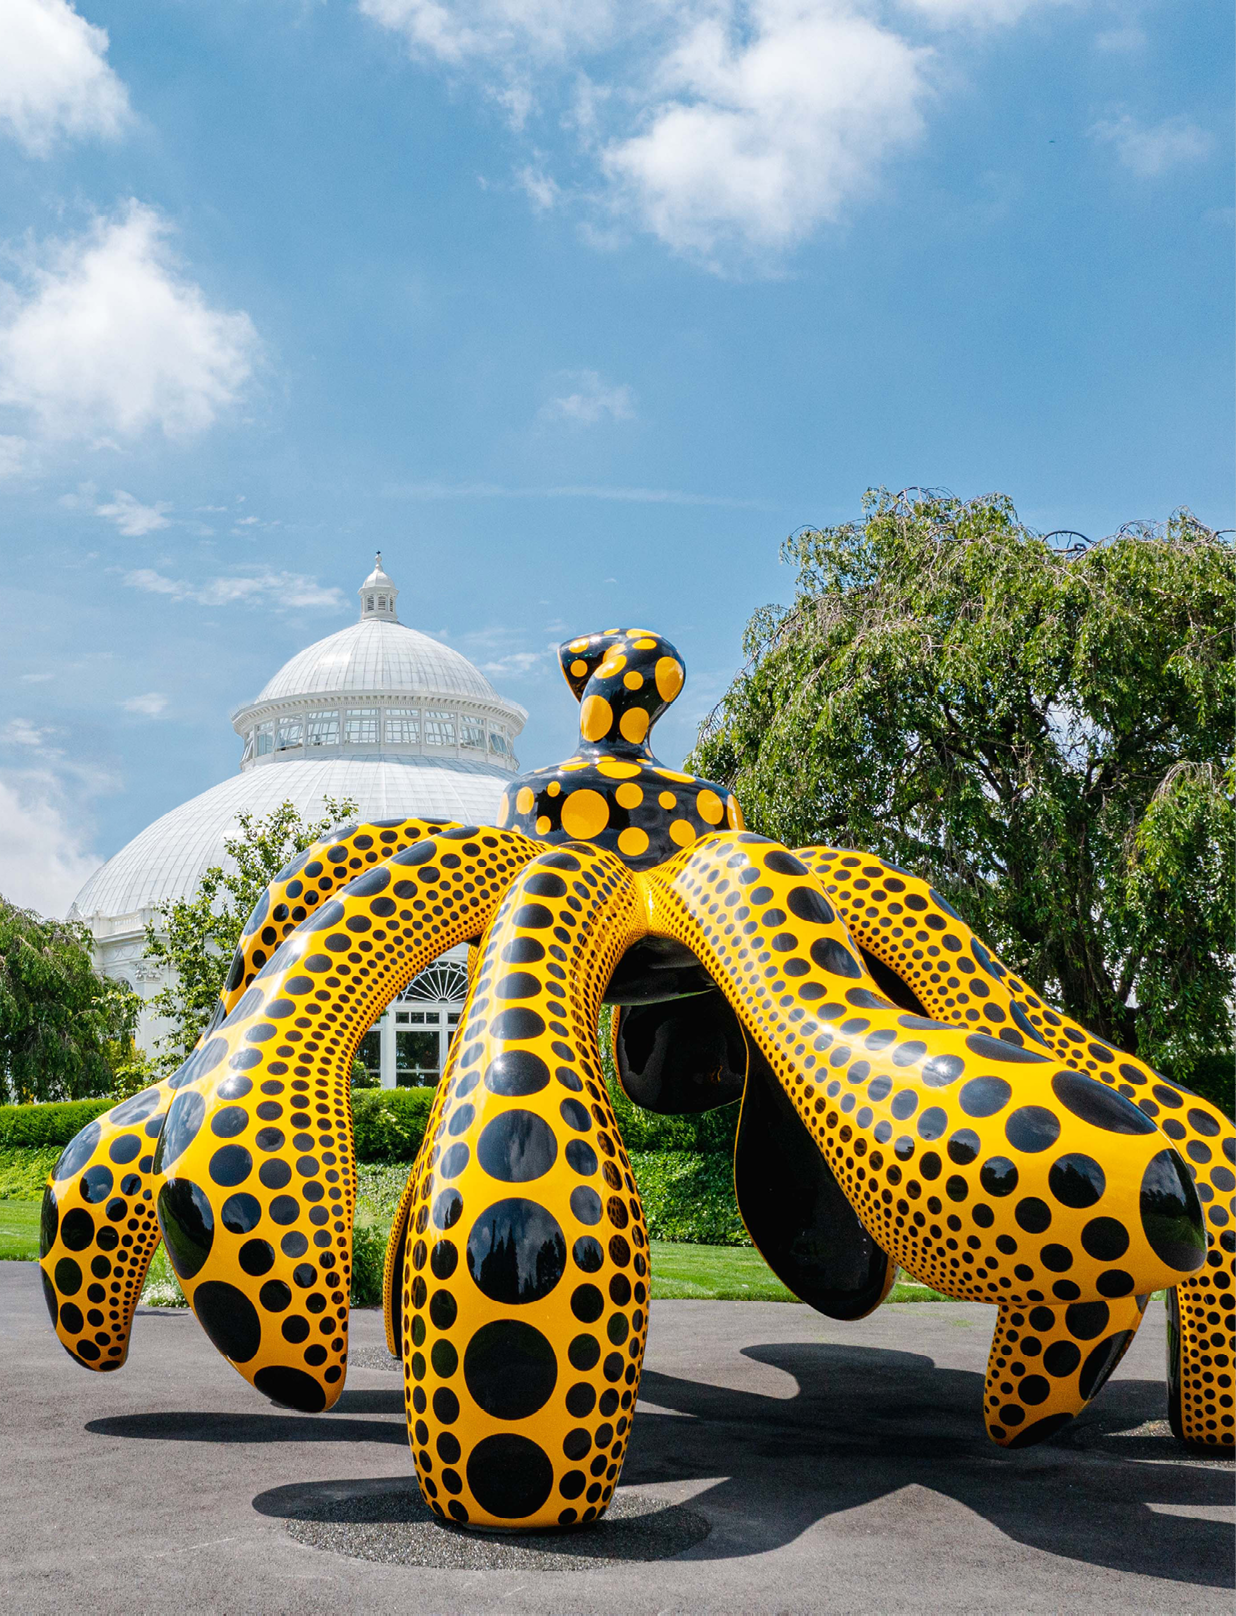 An enormous statue of a bright yellow pumpkin covered in black polka-dots seems to  dance  in front of the Enid A  Haupt Conservatory, its lower half separated into legs that almost look to be moving along the ground 